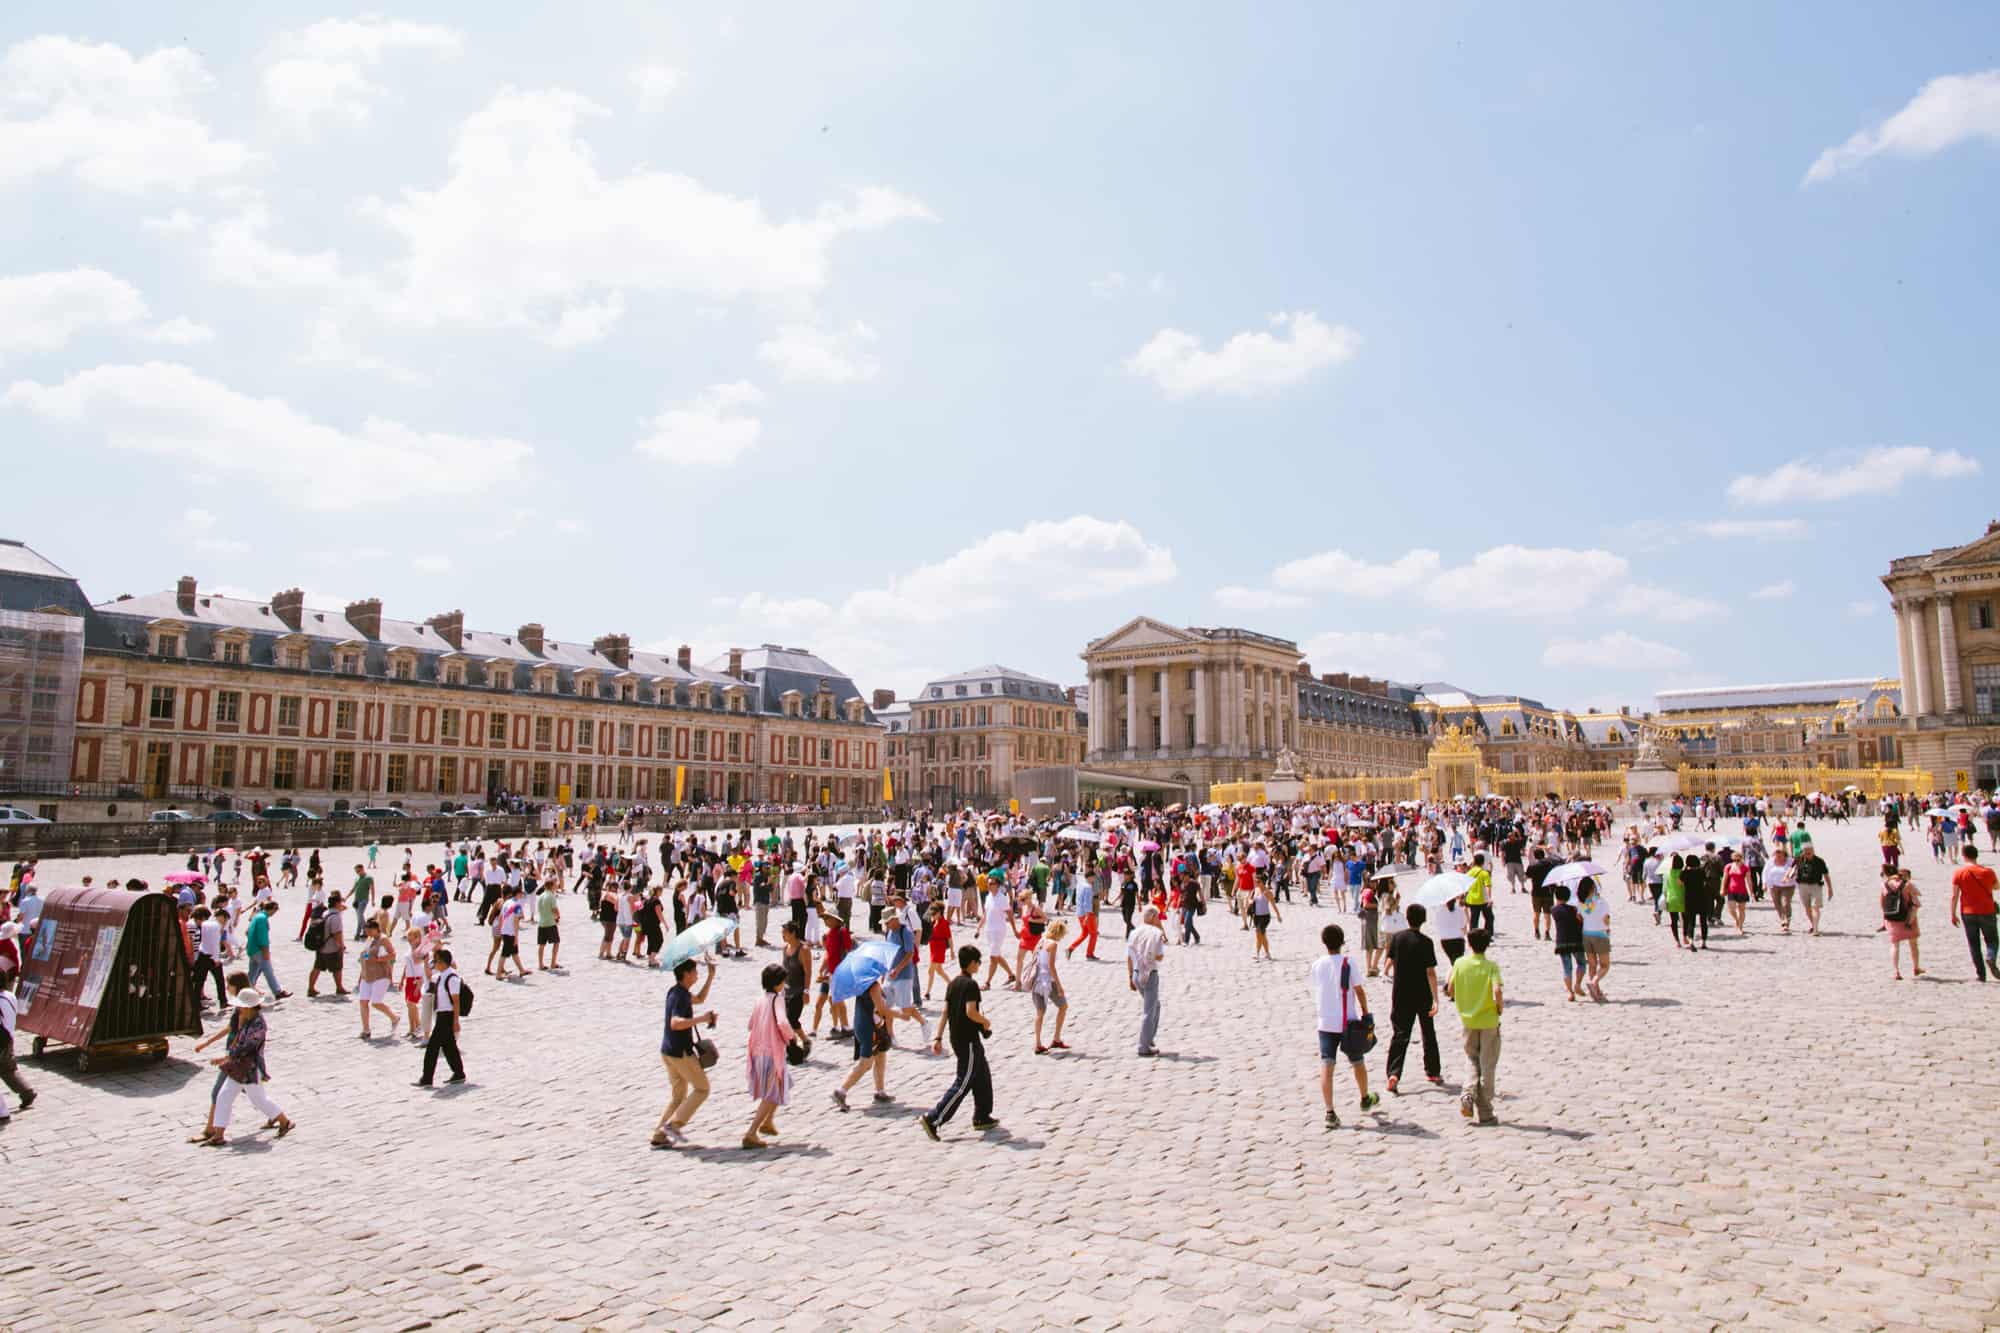 A long line forms in front of the palace of Versailles.